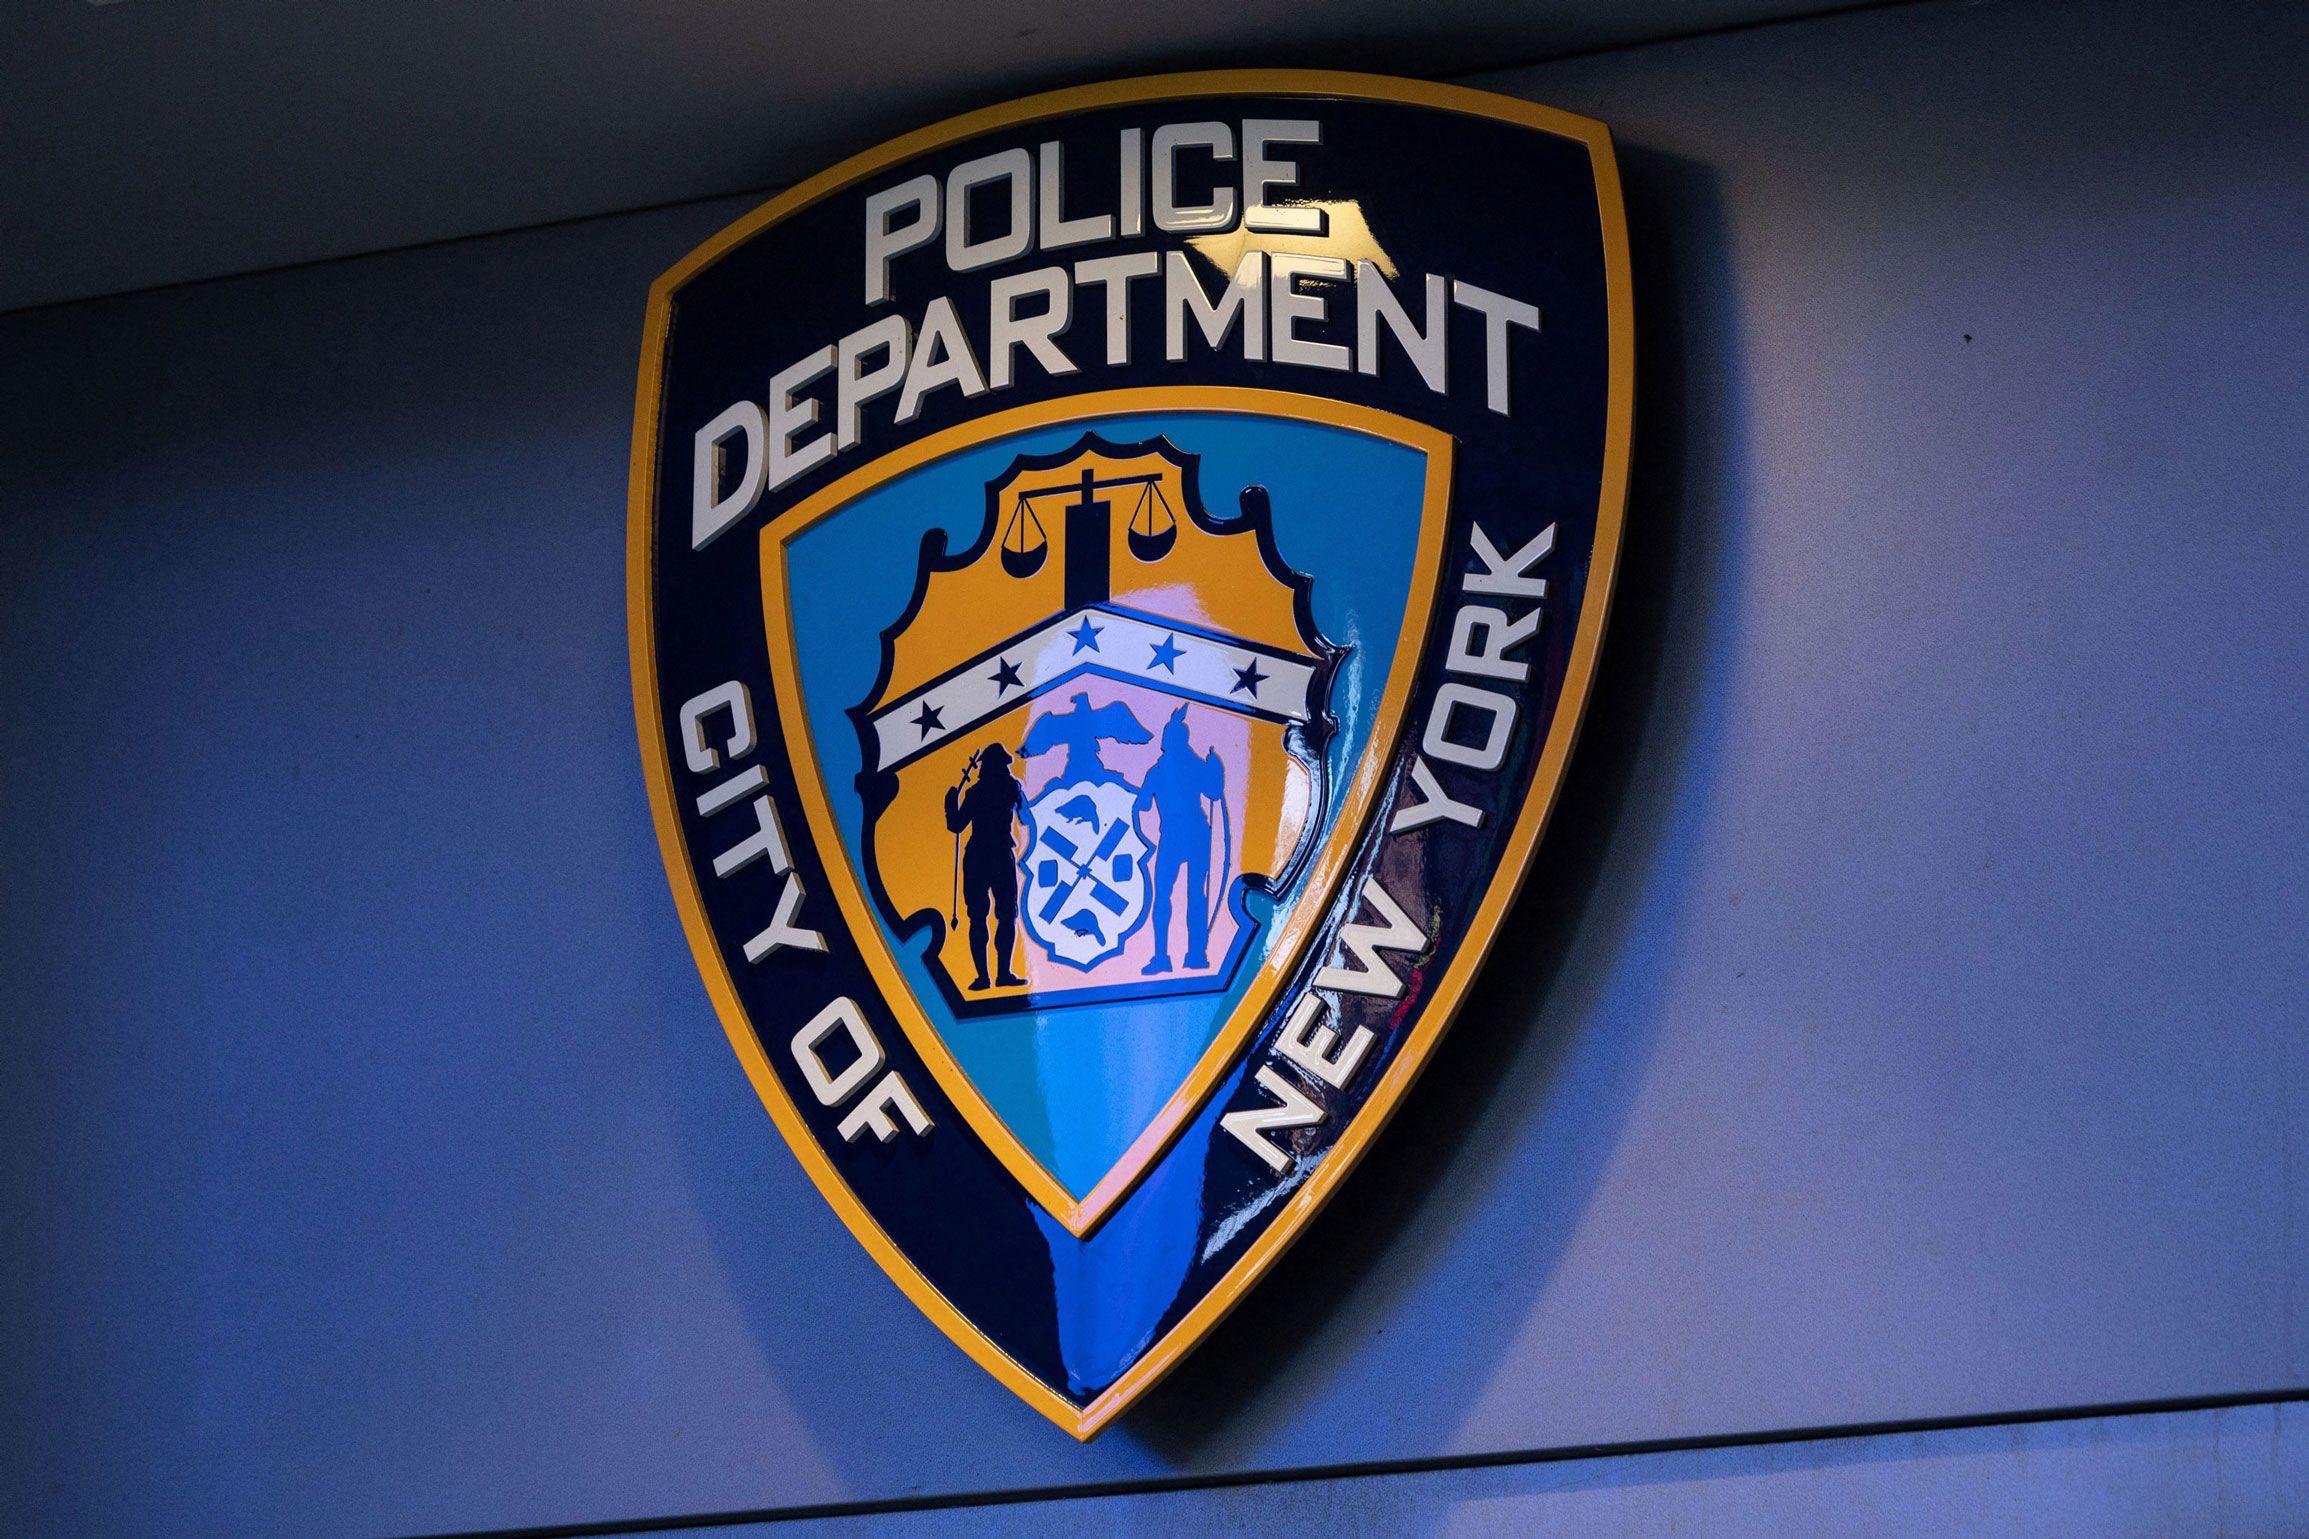 nypd-new-york-city-police-department-seal-logo-law-enforcement-hong